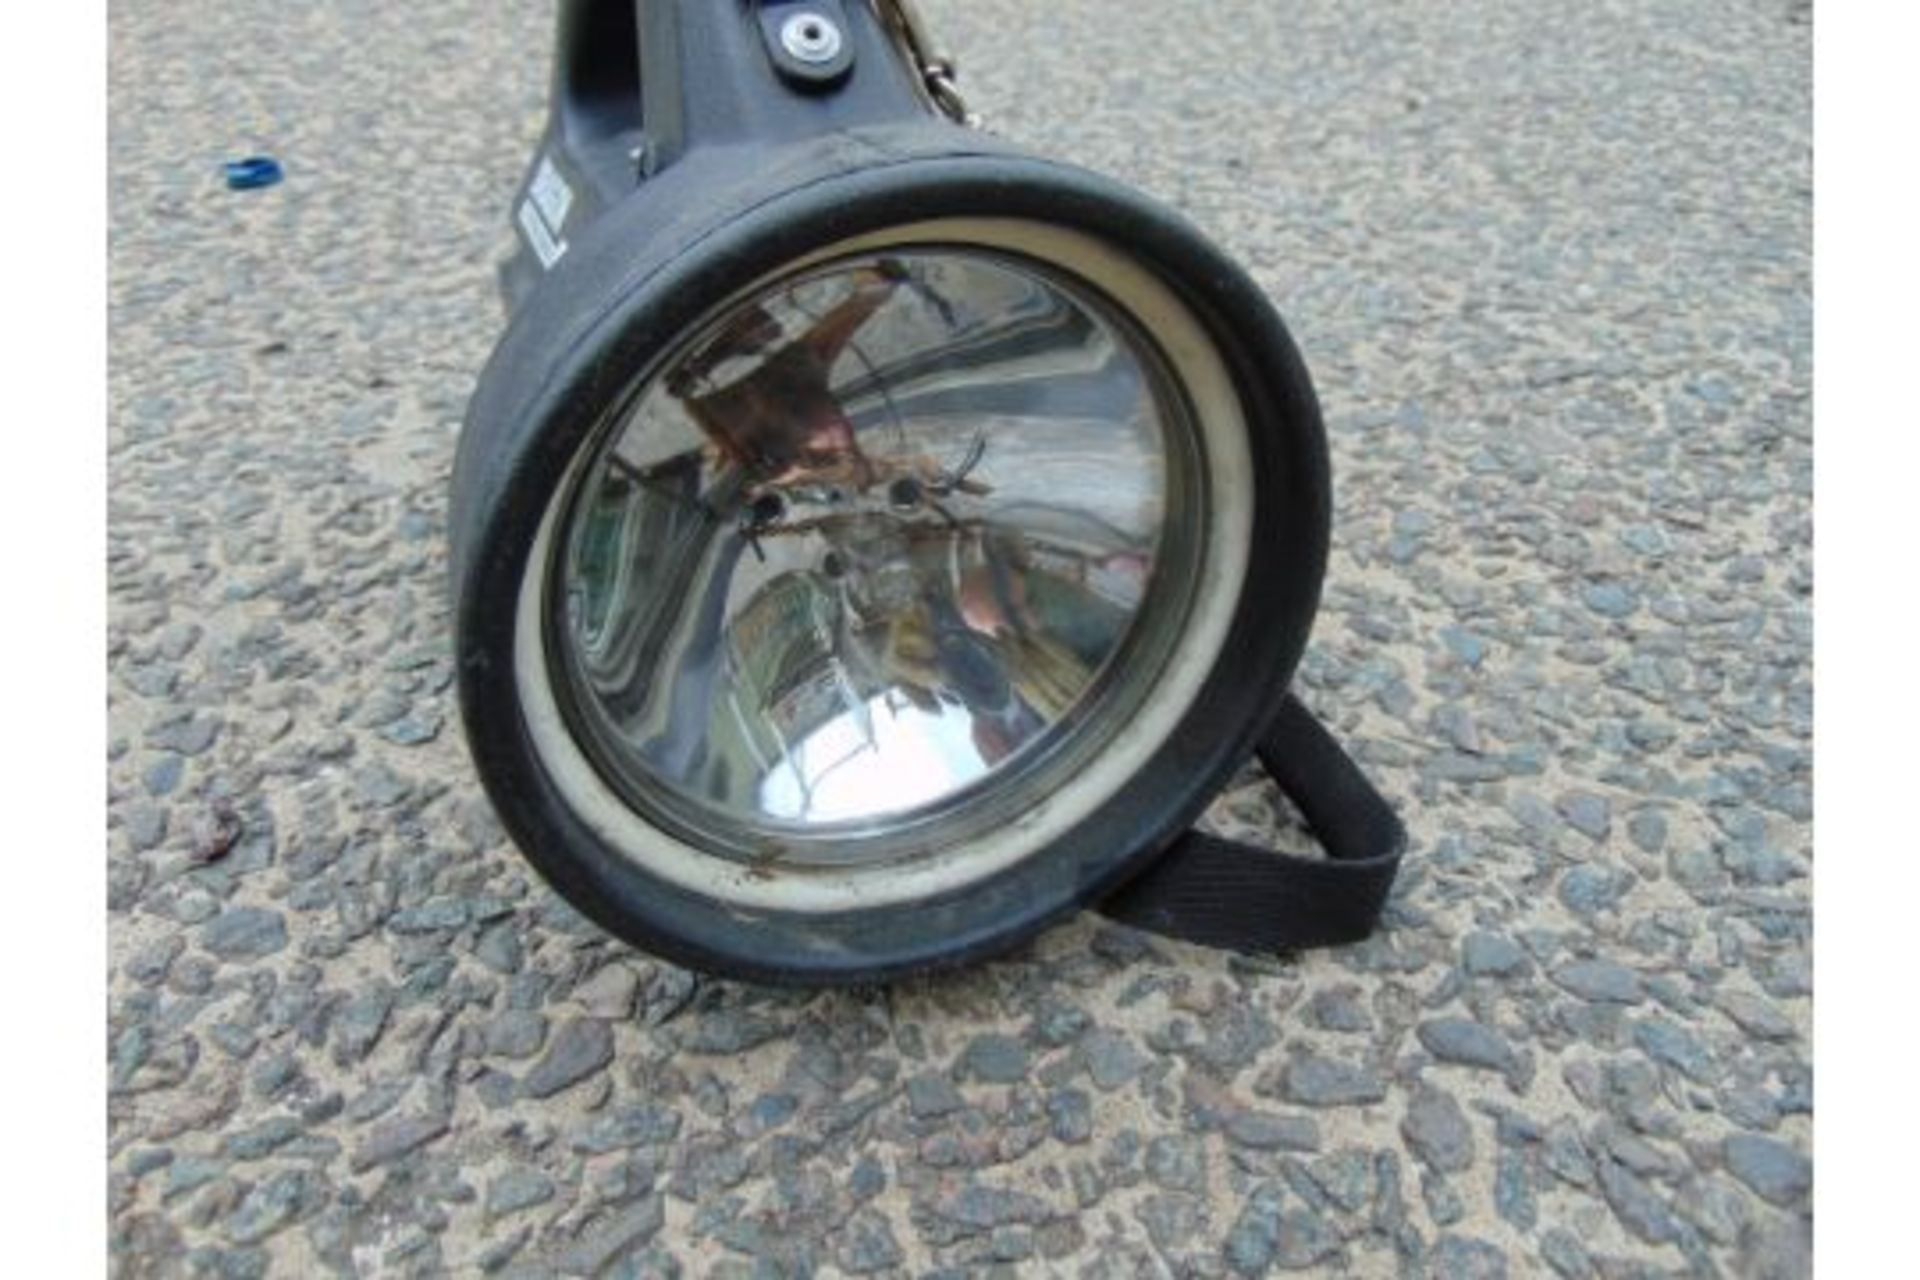 Dragon T12 Portable Searchlight - Image 2 of 4